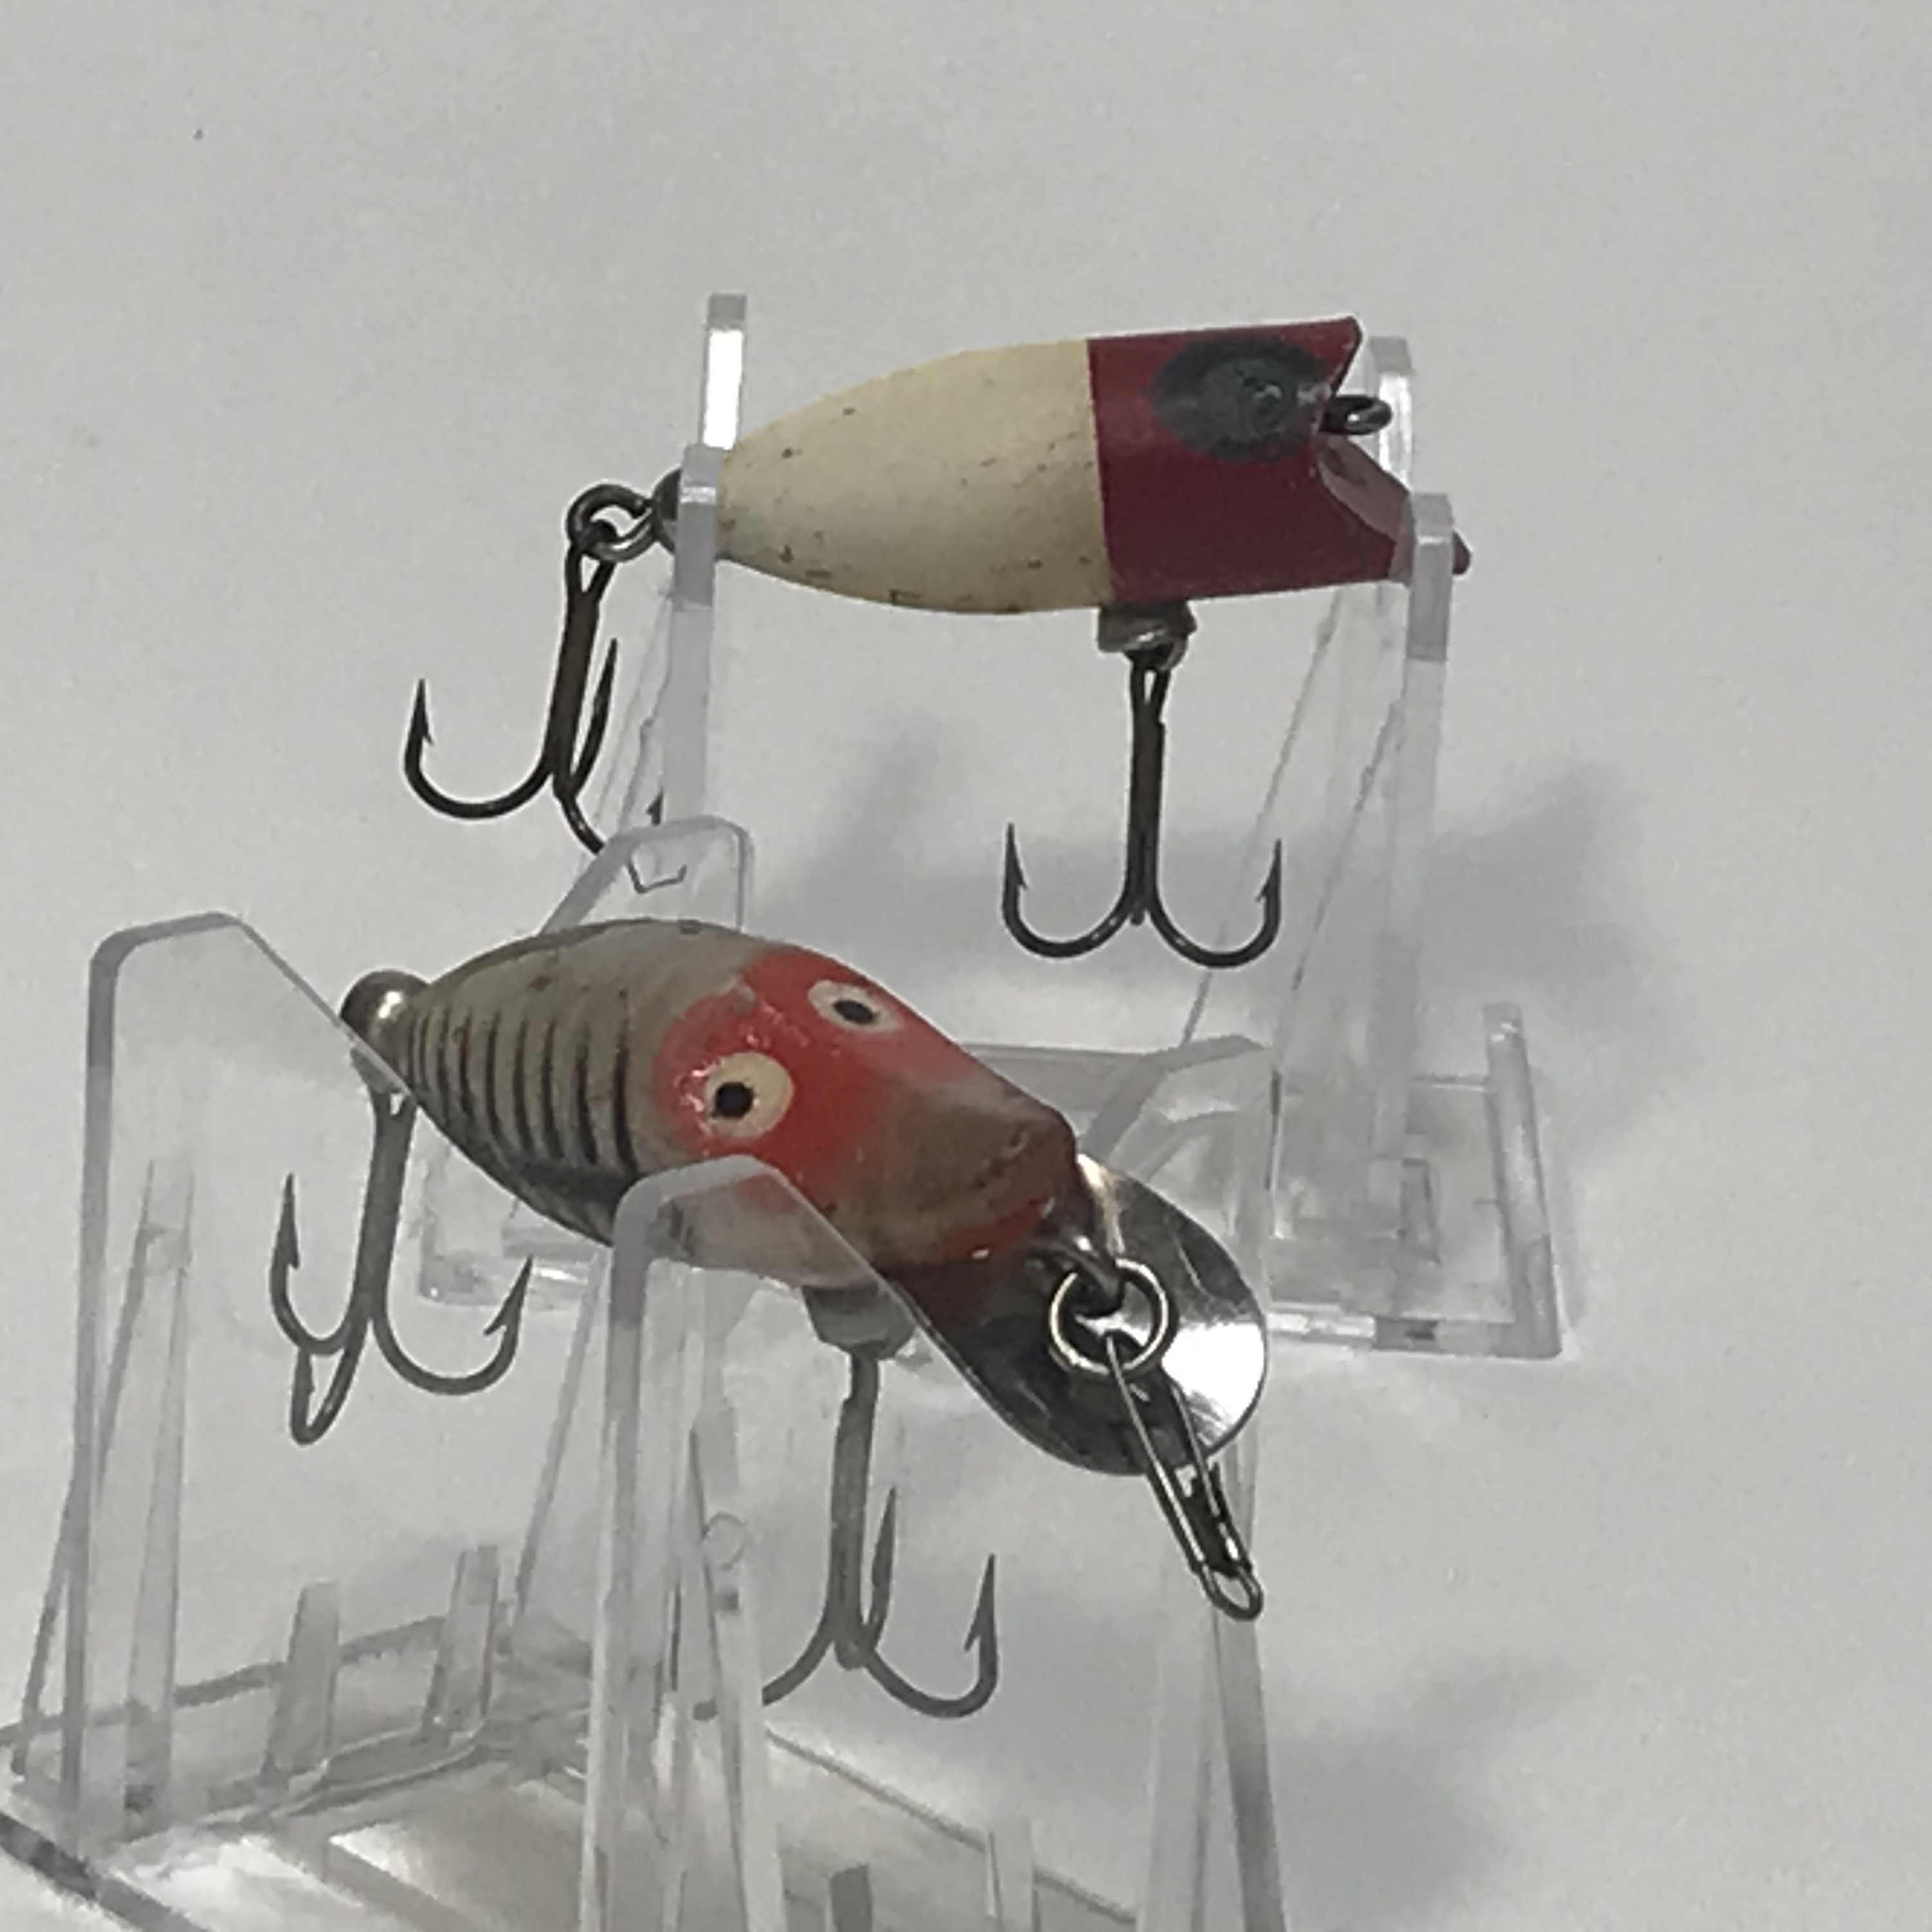 Heddon Tiny Runt Lucky 13 Antique / Vintage Fishing Lure, Tackle